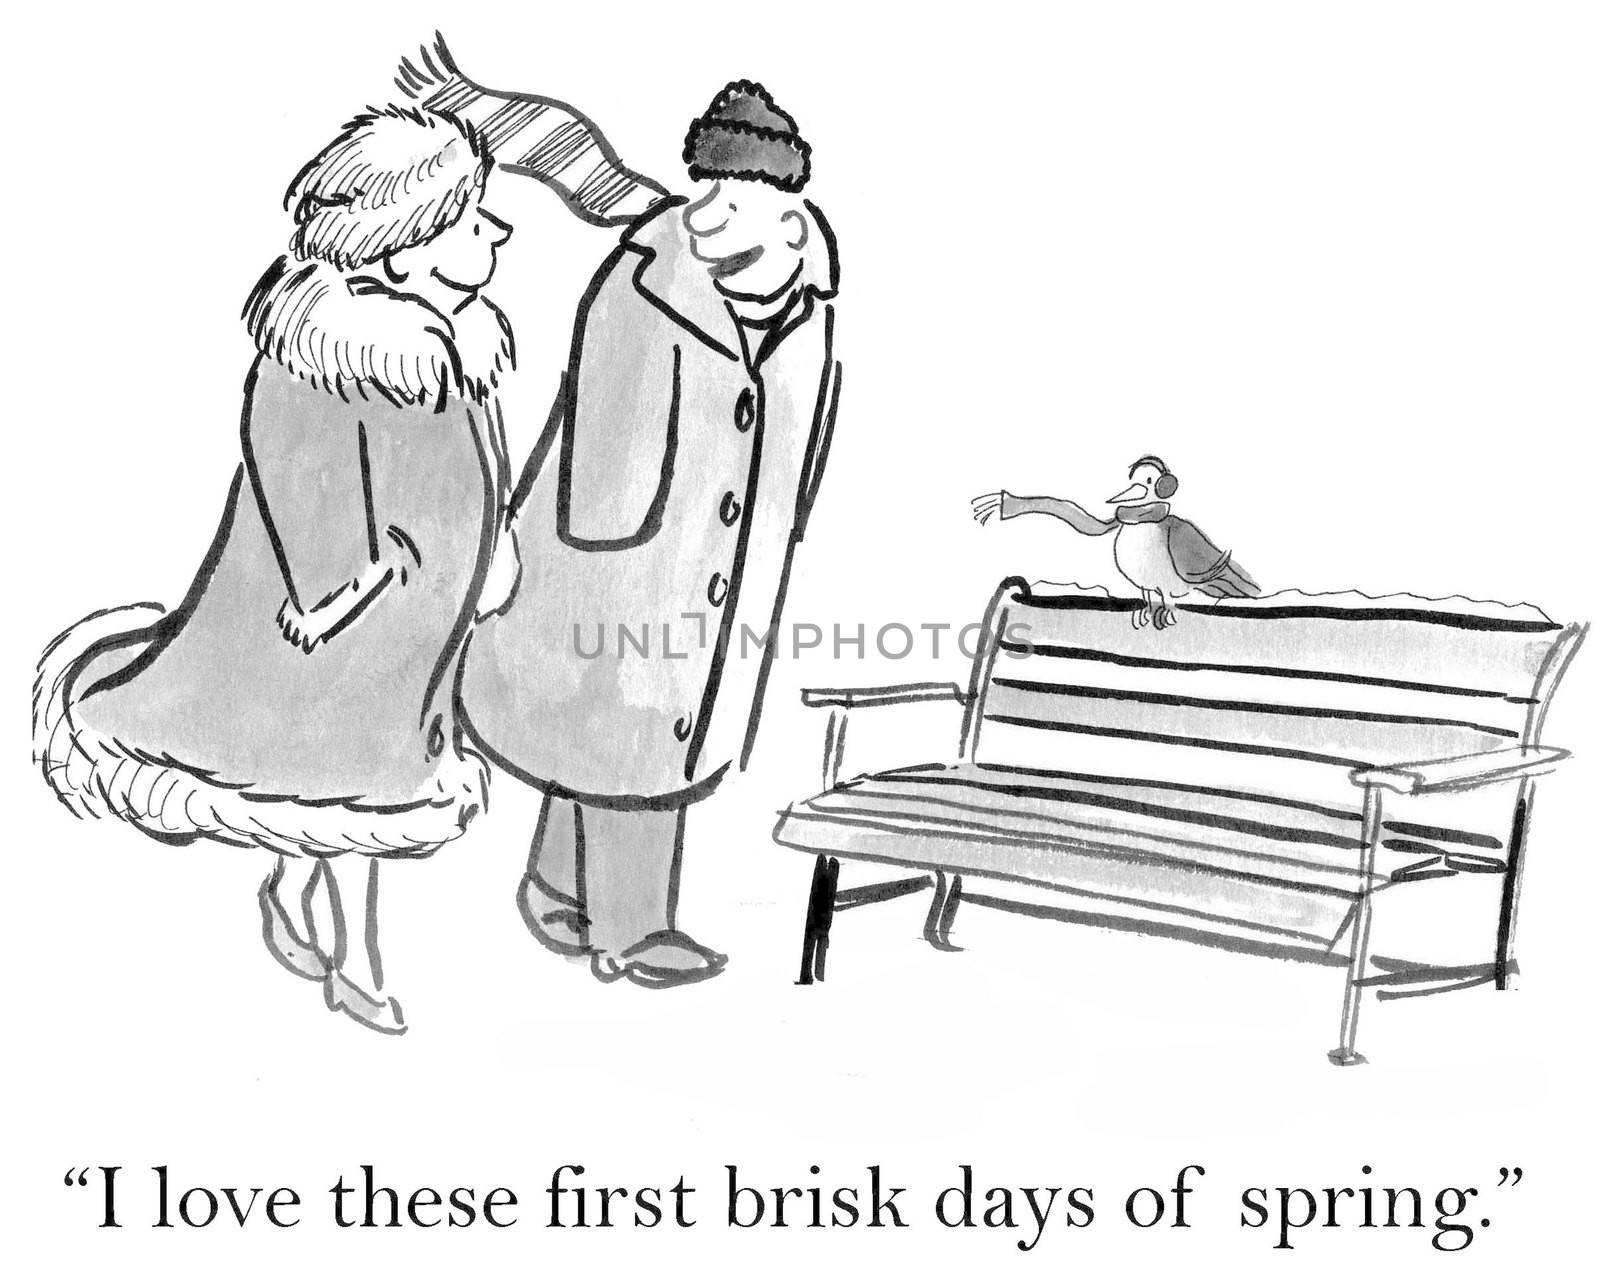 "I love these first brisk days of spring."